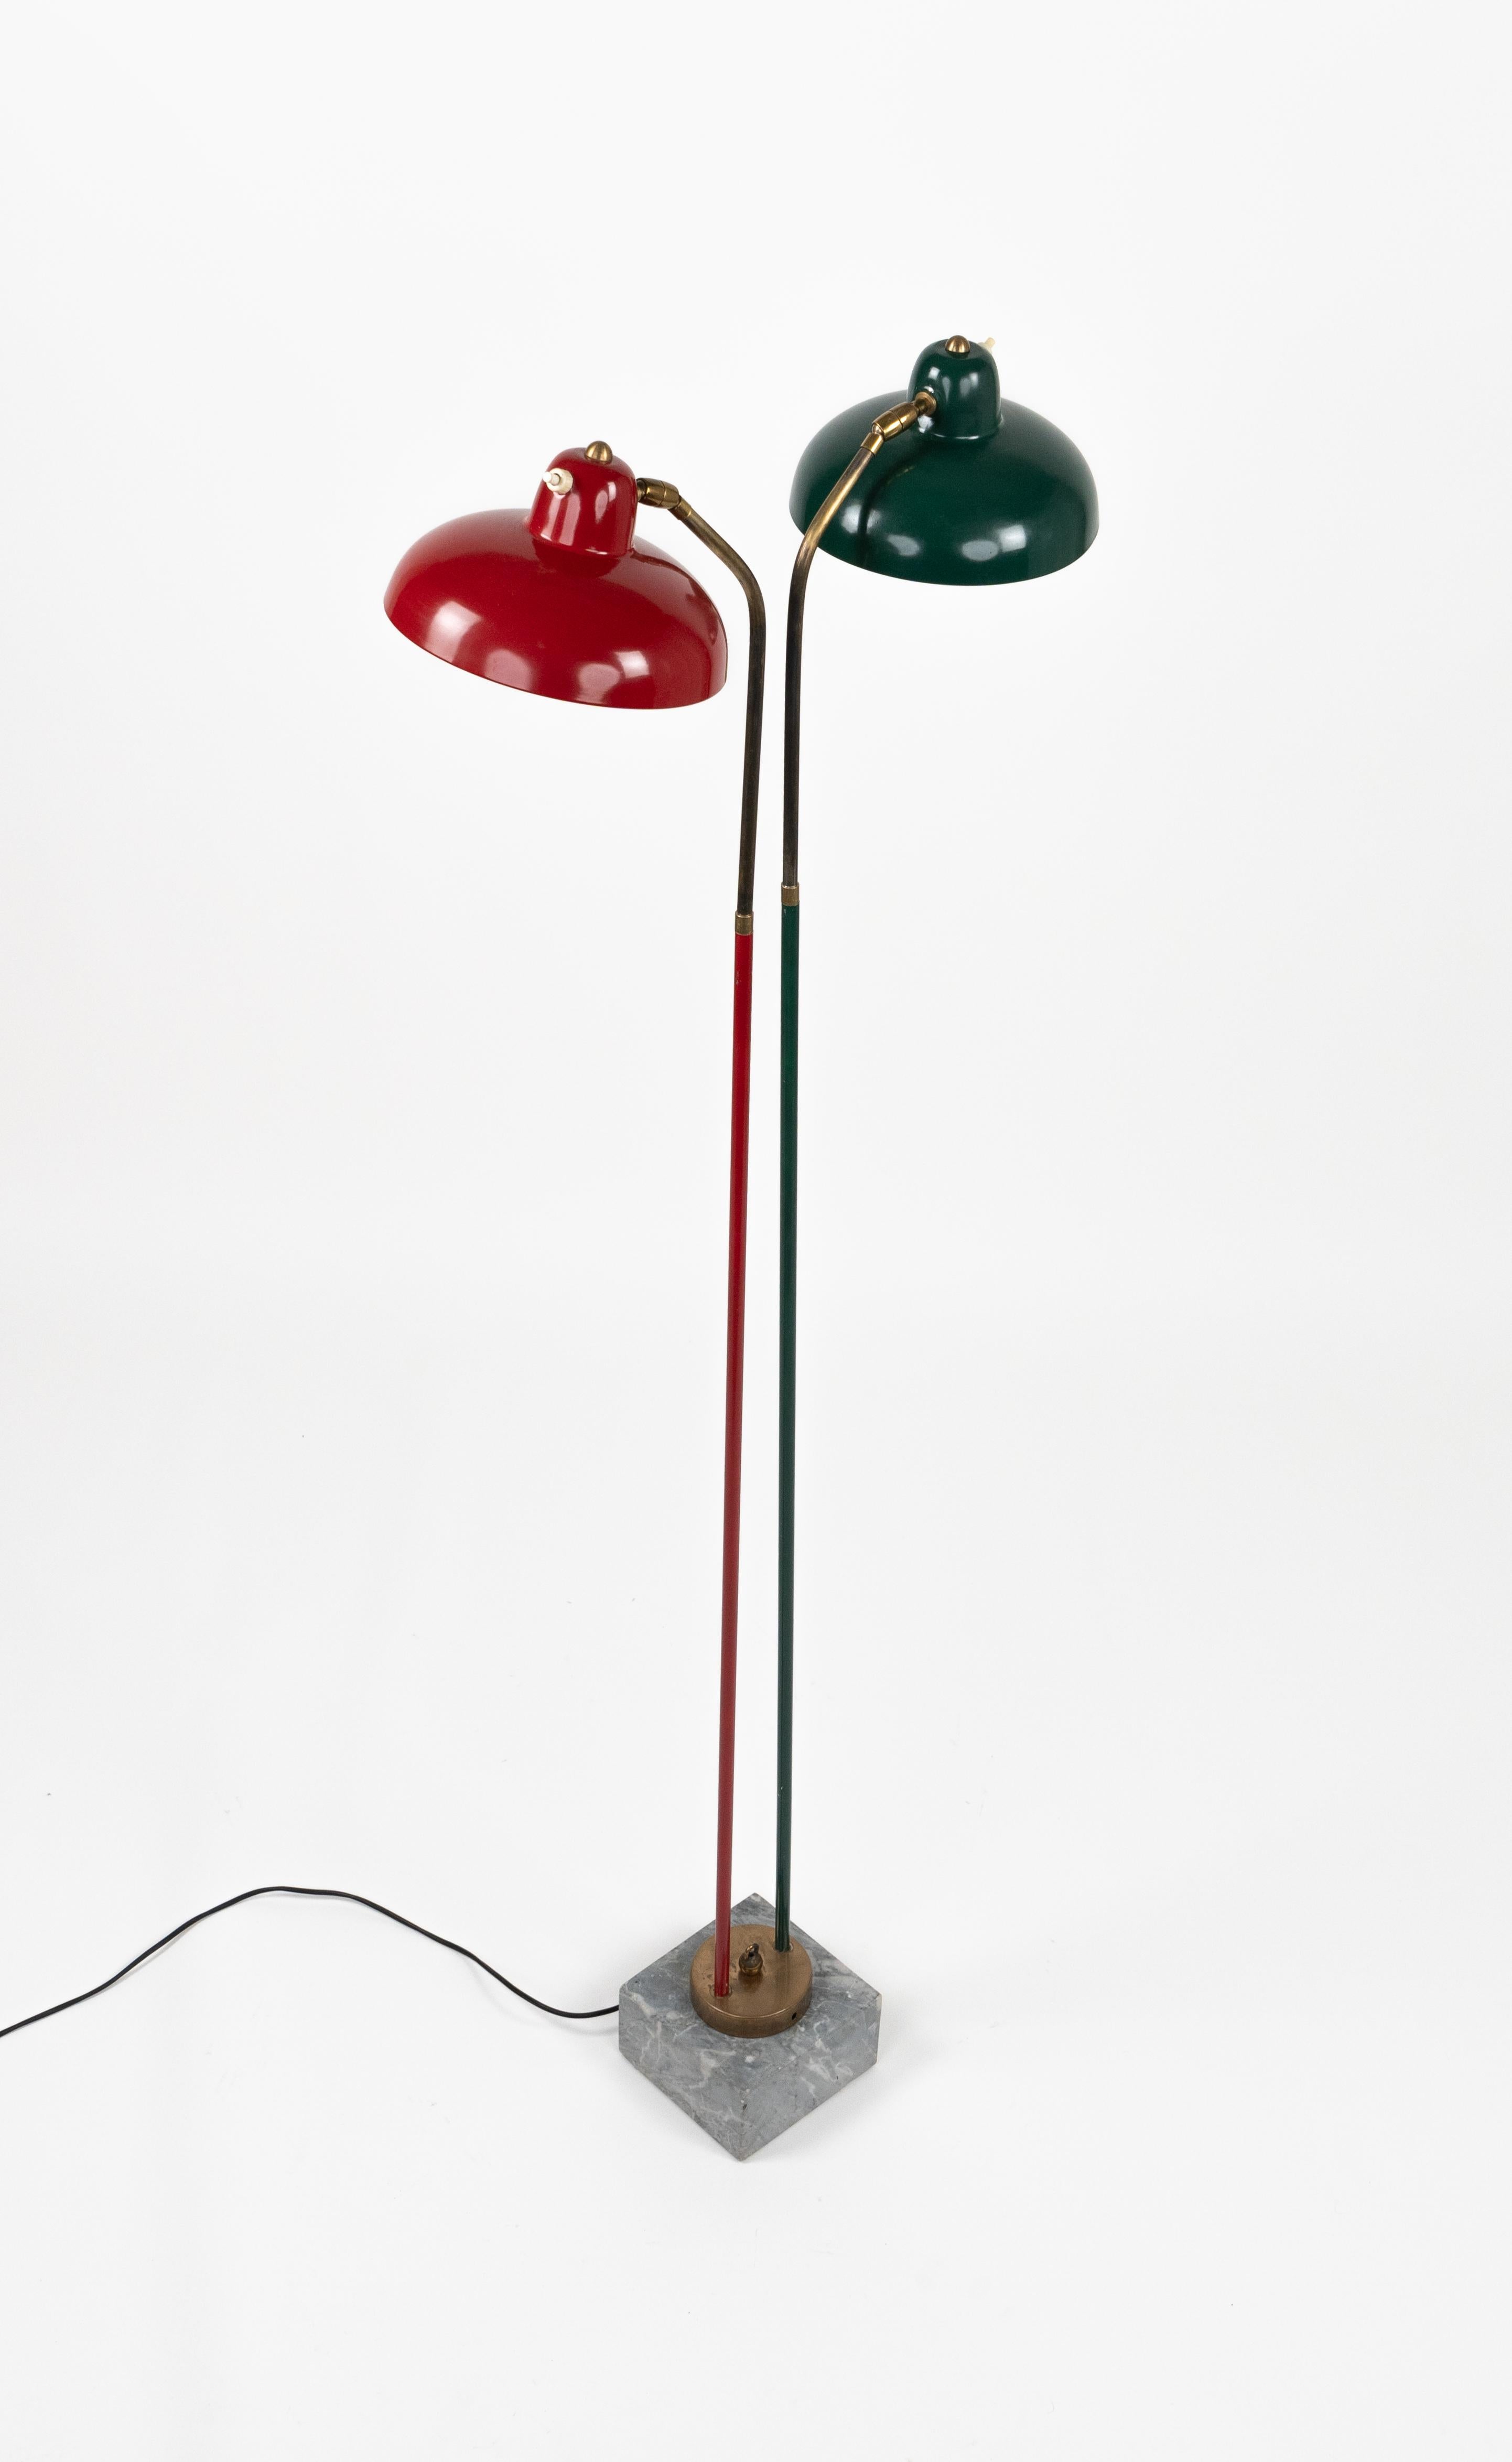 Mid-20th Century Floor Lamp in Marble, Lacquered Metal and Brass Stilnovo Style, Italy 1950s For Sale